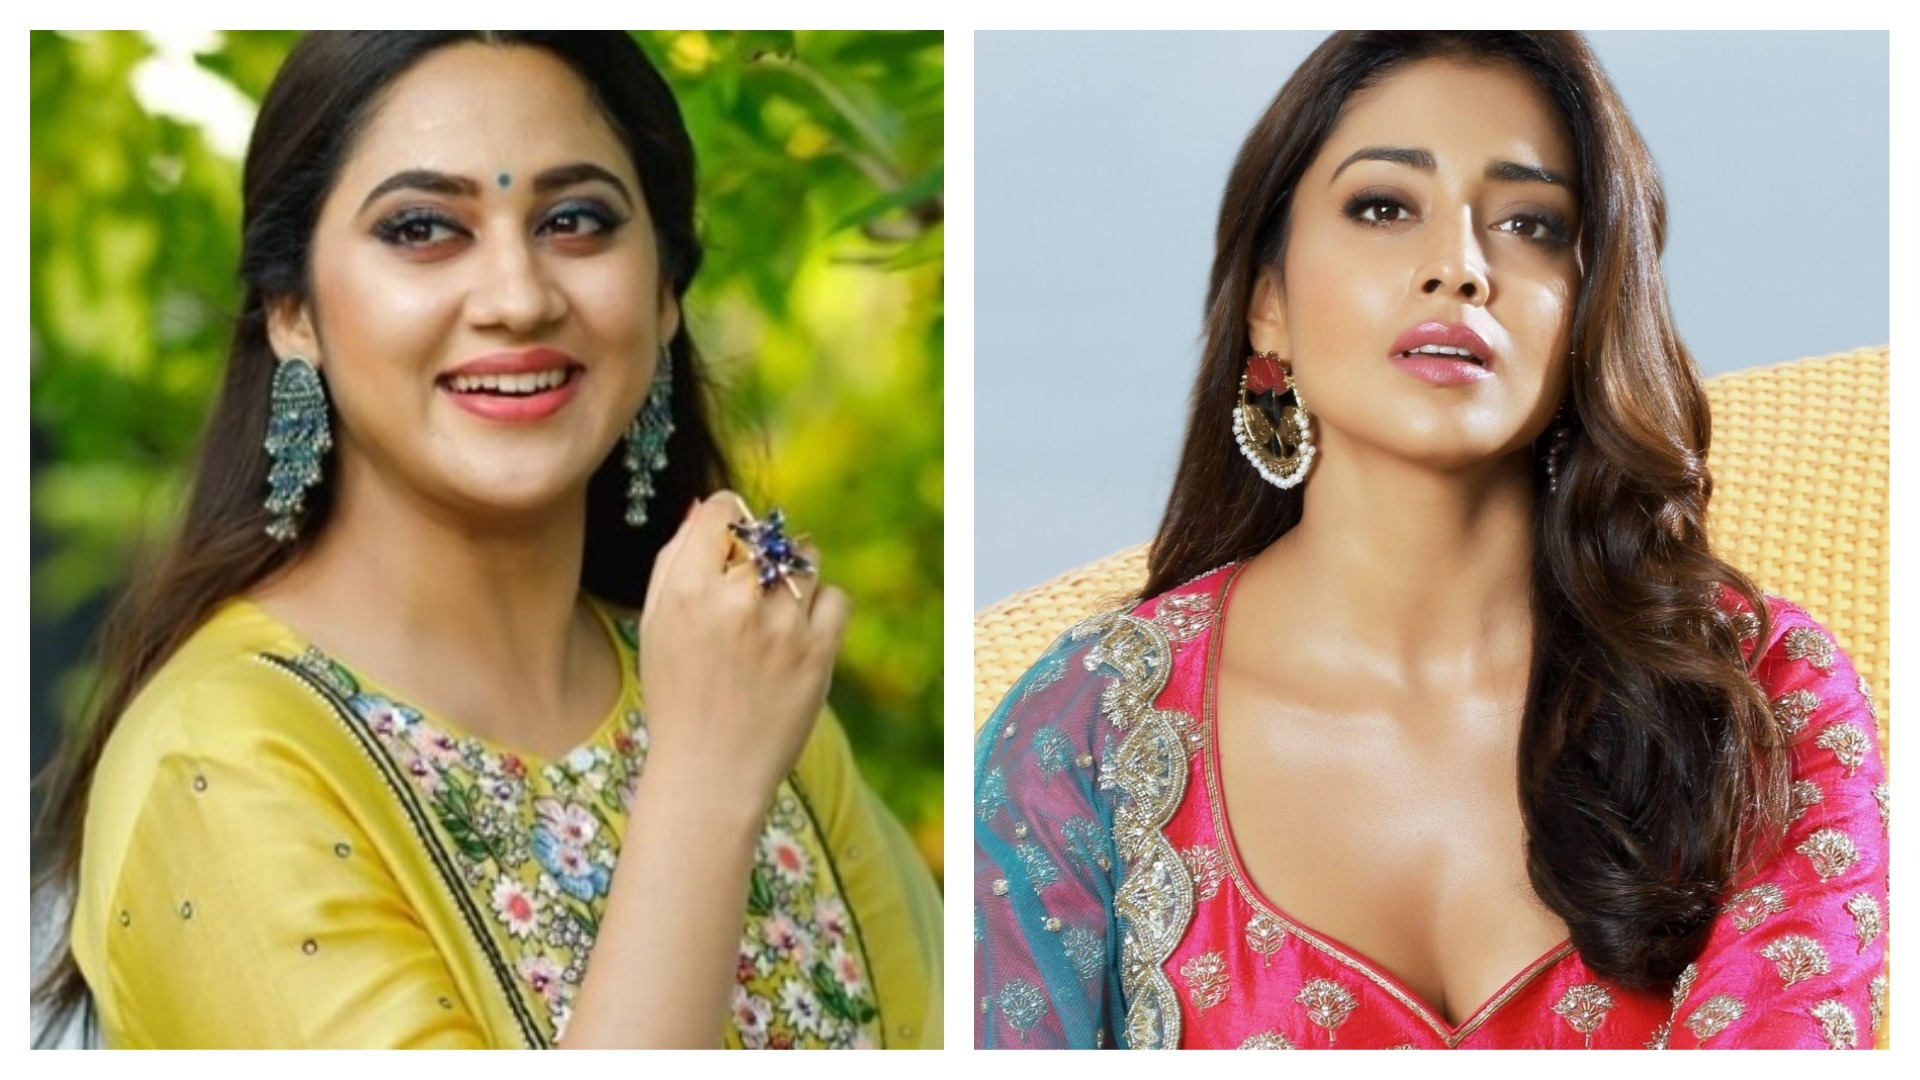 Mia and Shriya Sharan - There is a connection between them, do you know what it is?